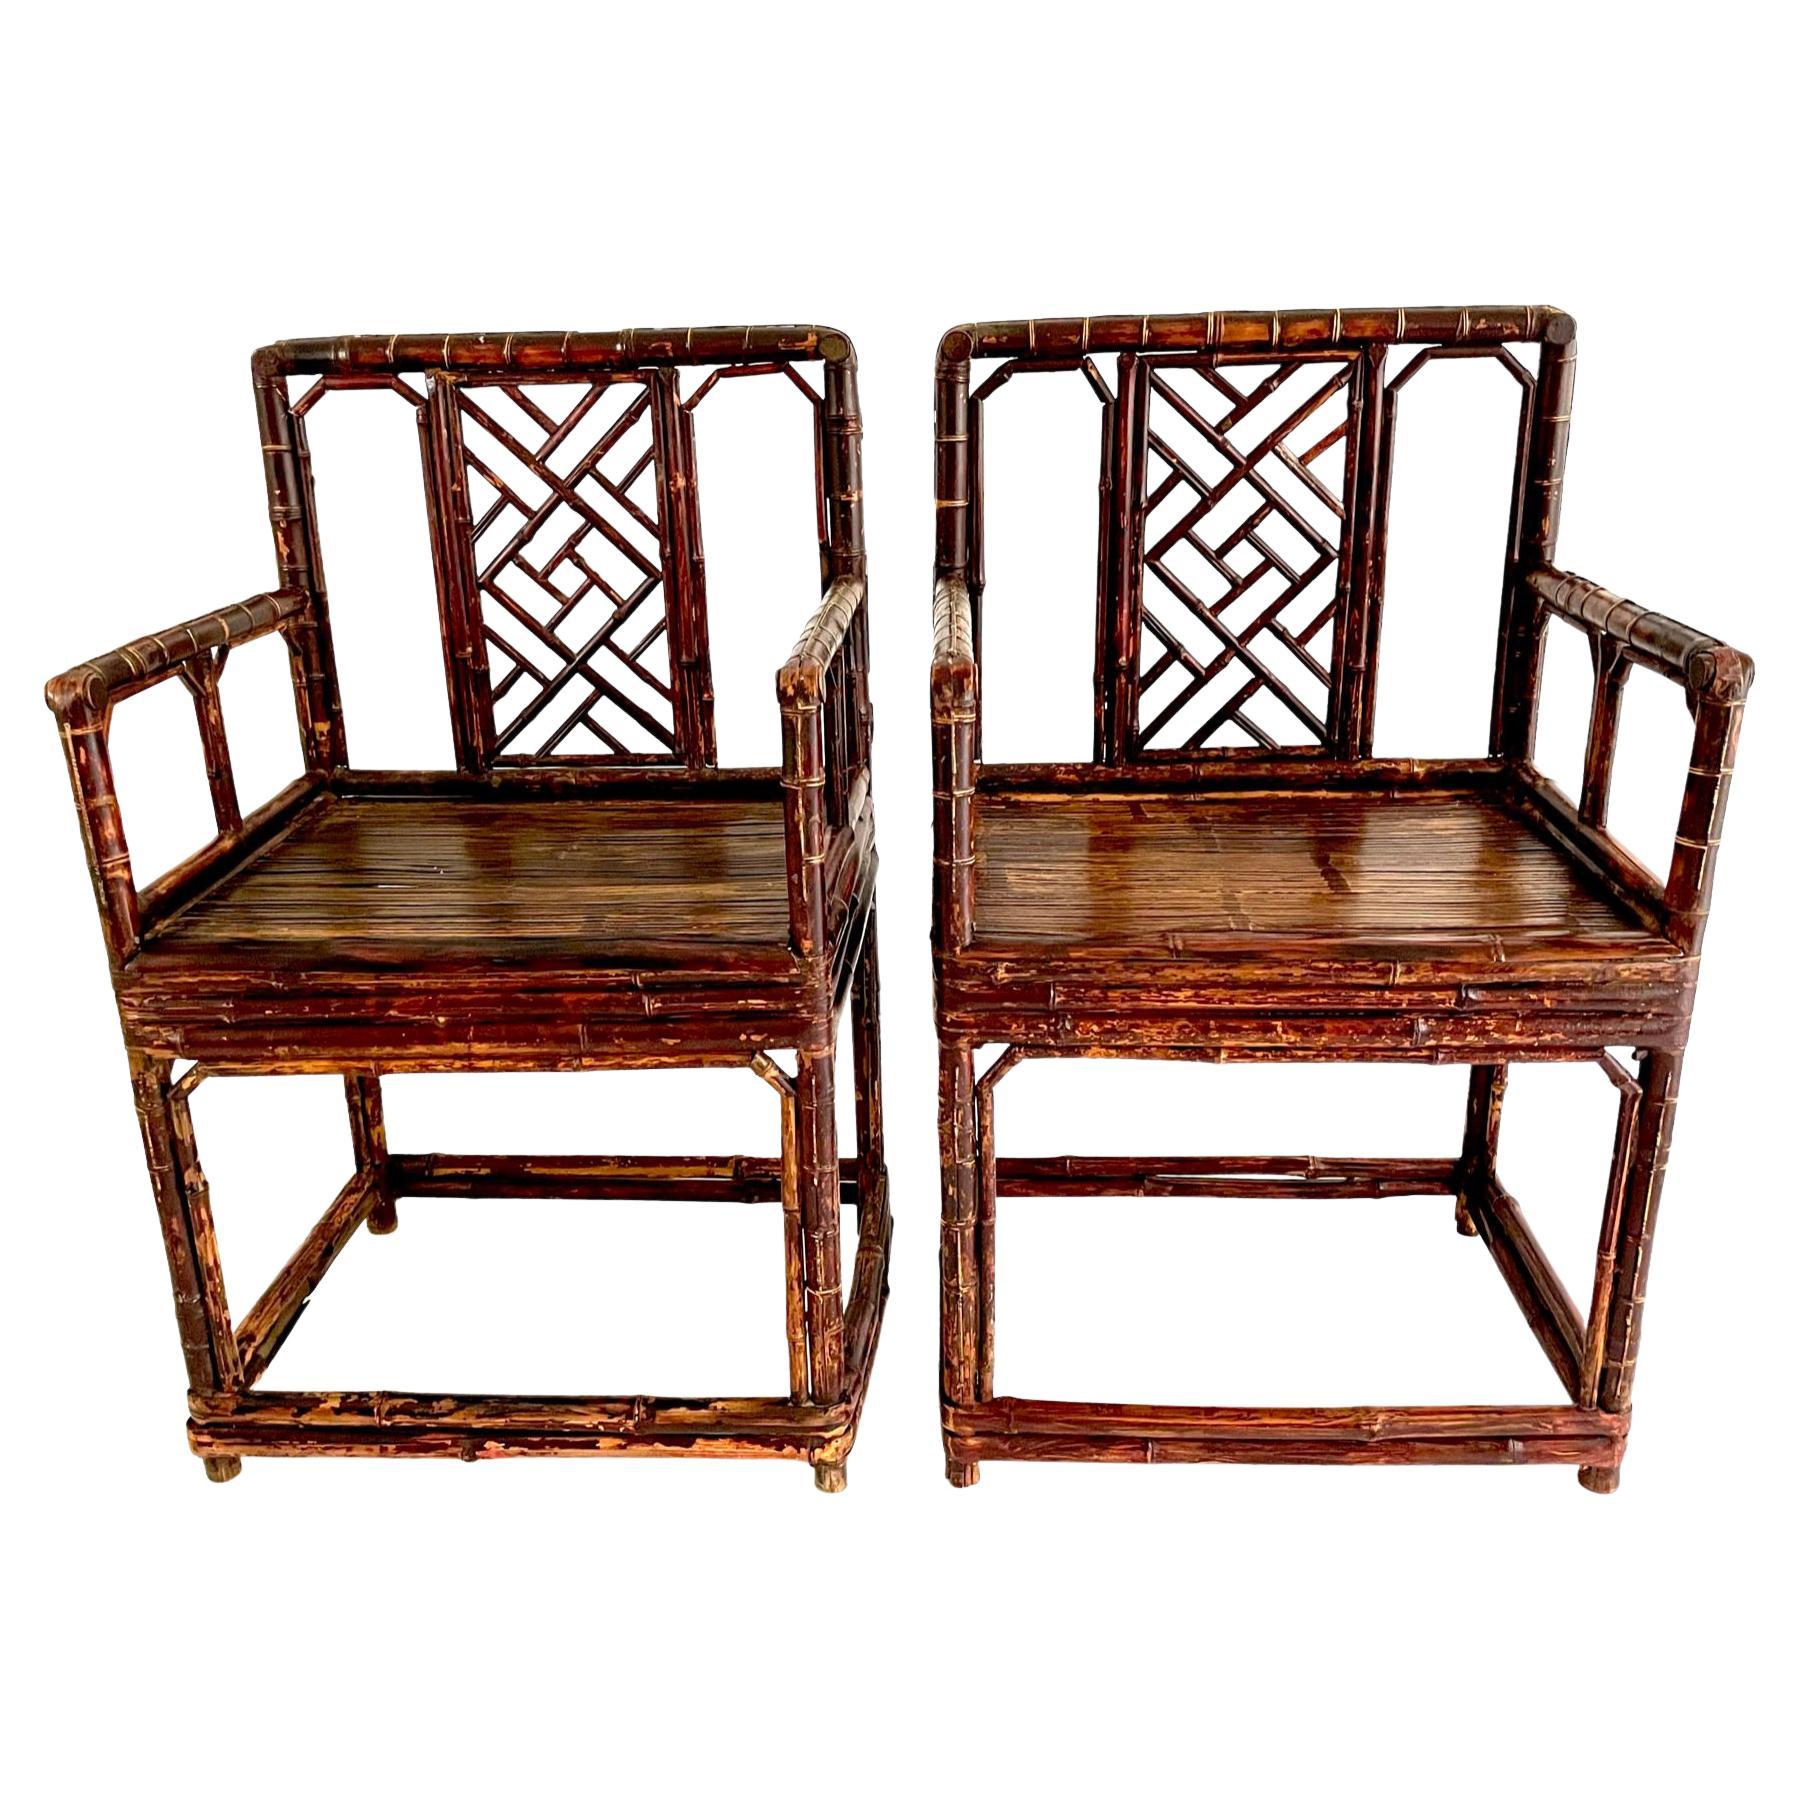 Pair of Late 19th Century Chinese Bamboo Chairs